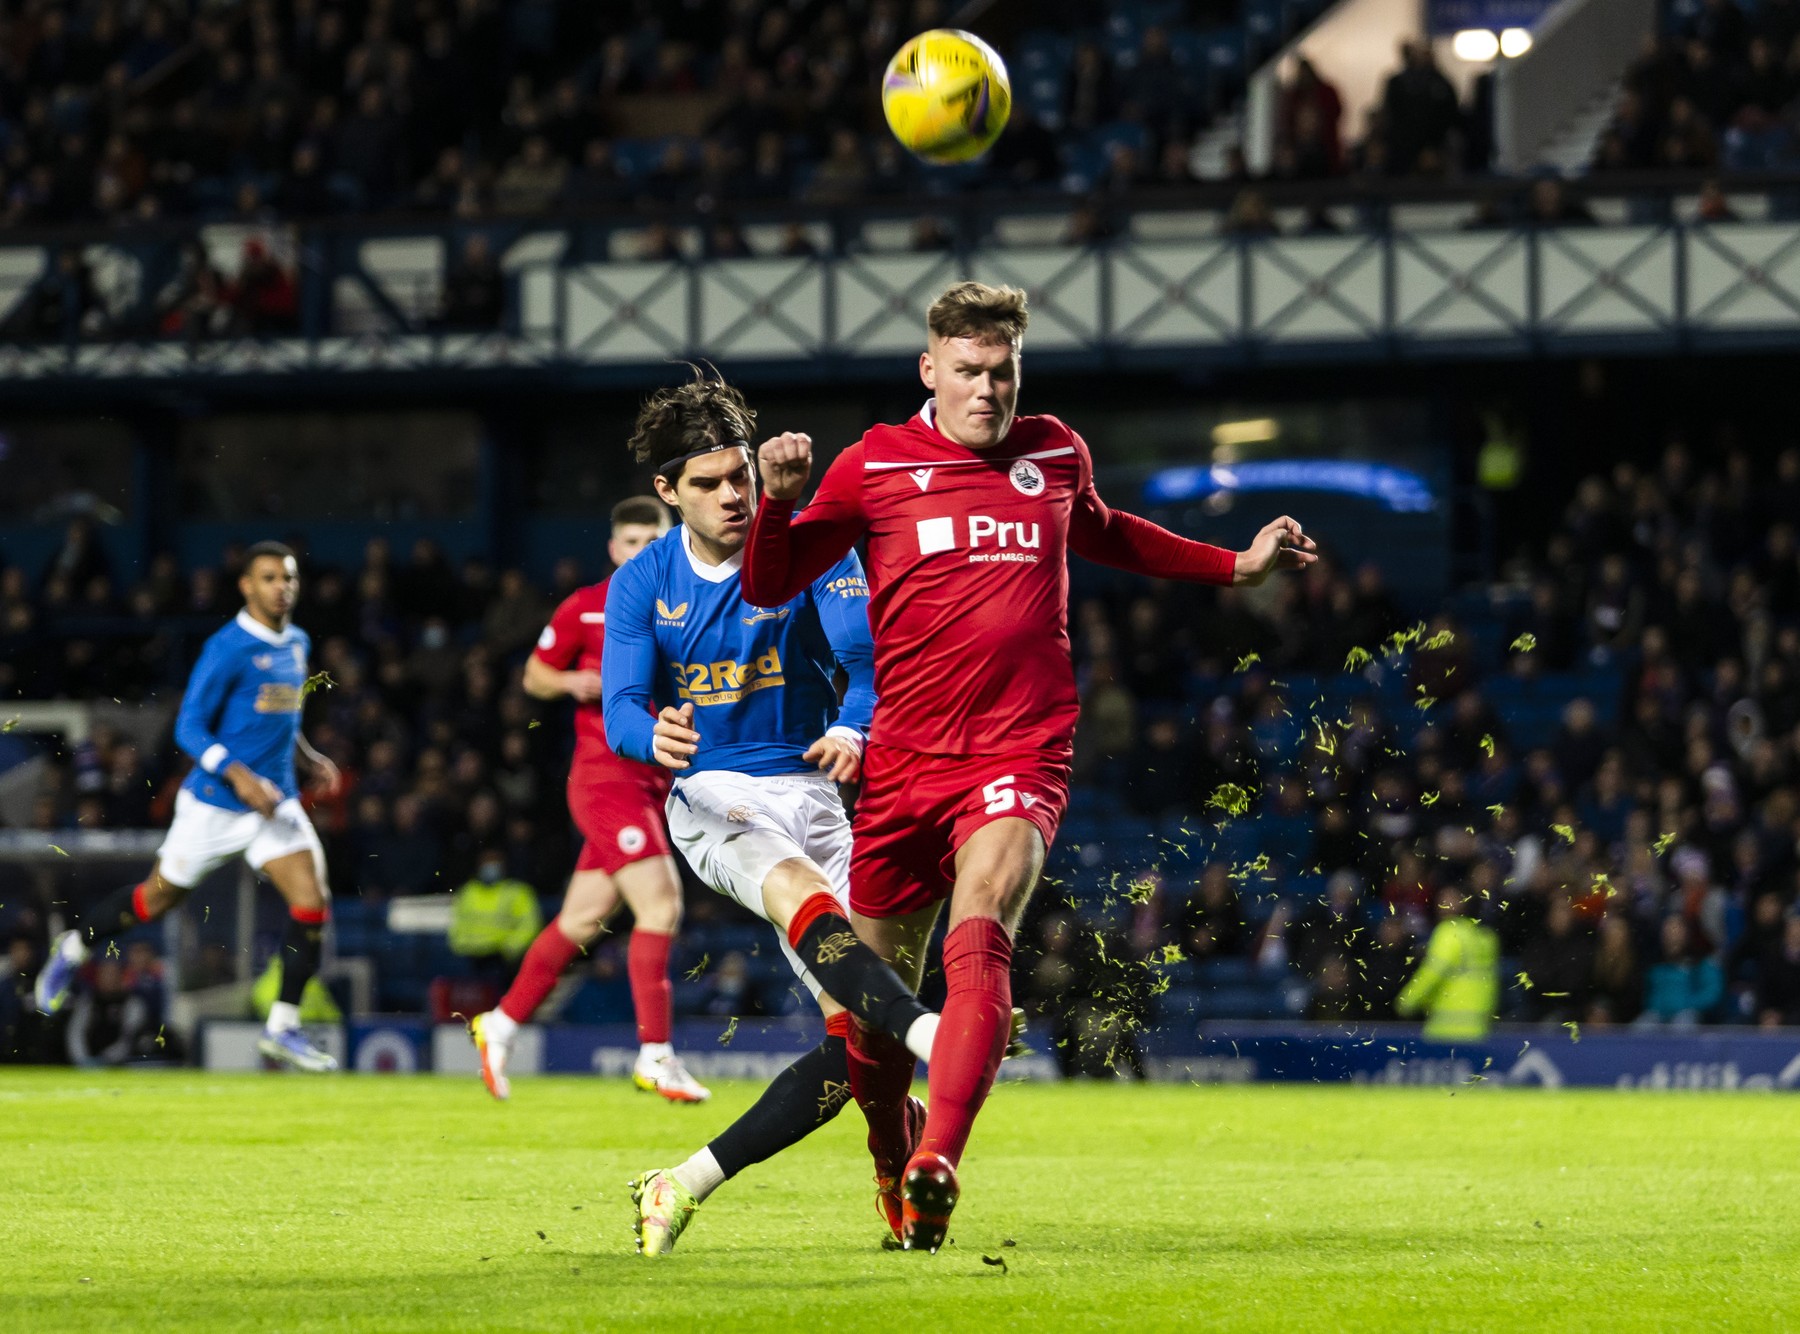 Rangers Midfielder Ianis Hagi
Rangers v Stirling Albion, Scottish Cup, Football, Ibrox Stadium, Glasgow, Scotland, UK - 21 Jan 2022,Image: 655222950, License: Rights-managed, Restrictions: EDITORIAL USE ONLY No use with unauthorised audio, video, data, fixture lists, club/league logos or 